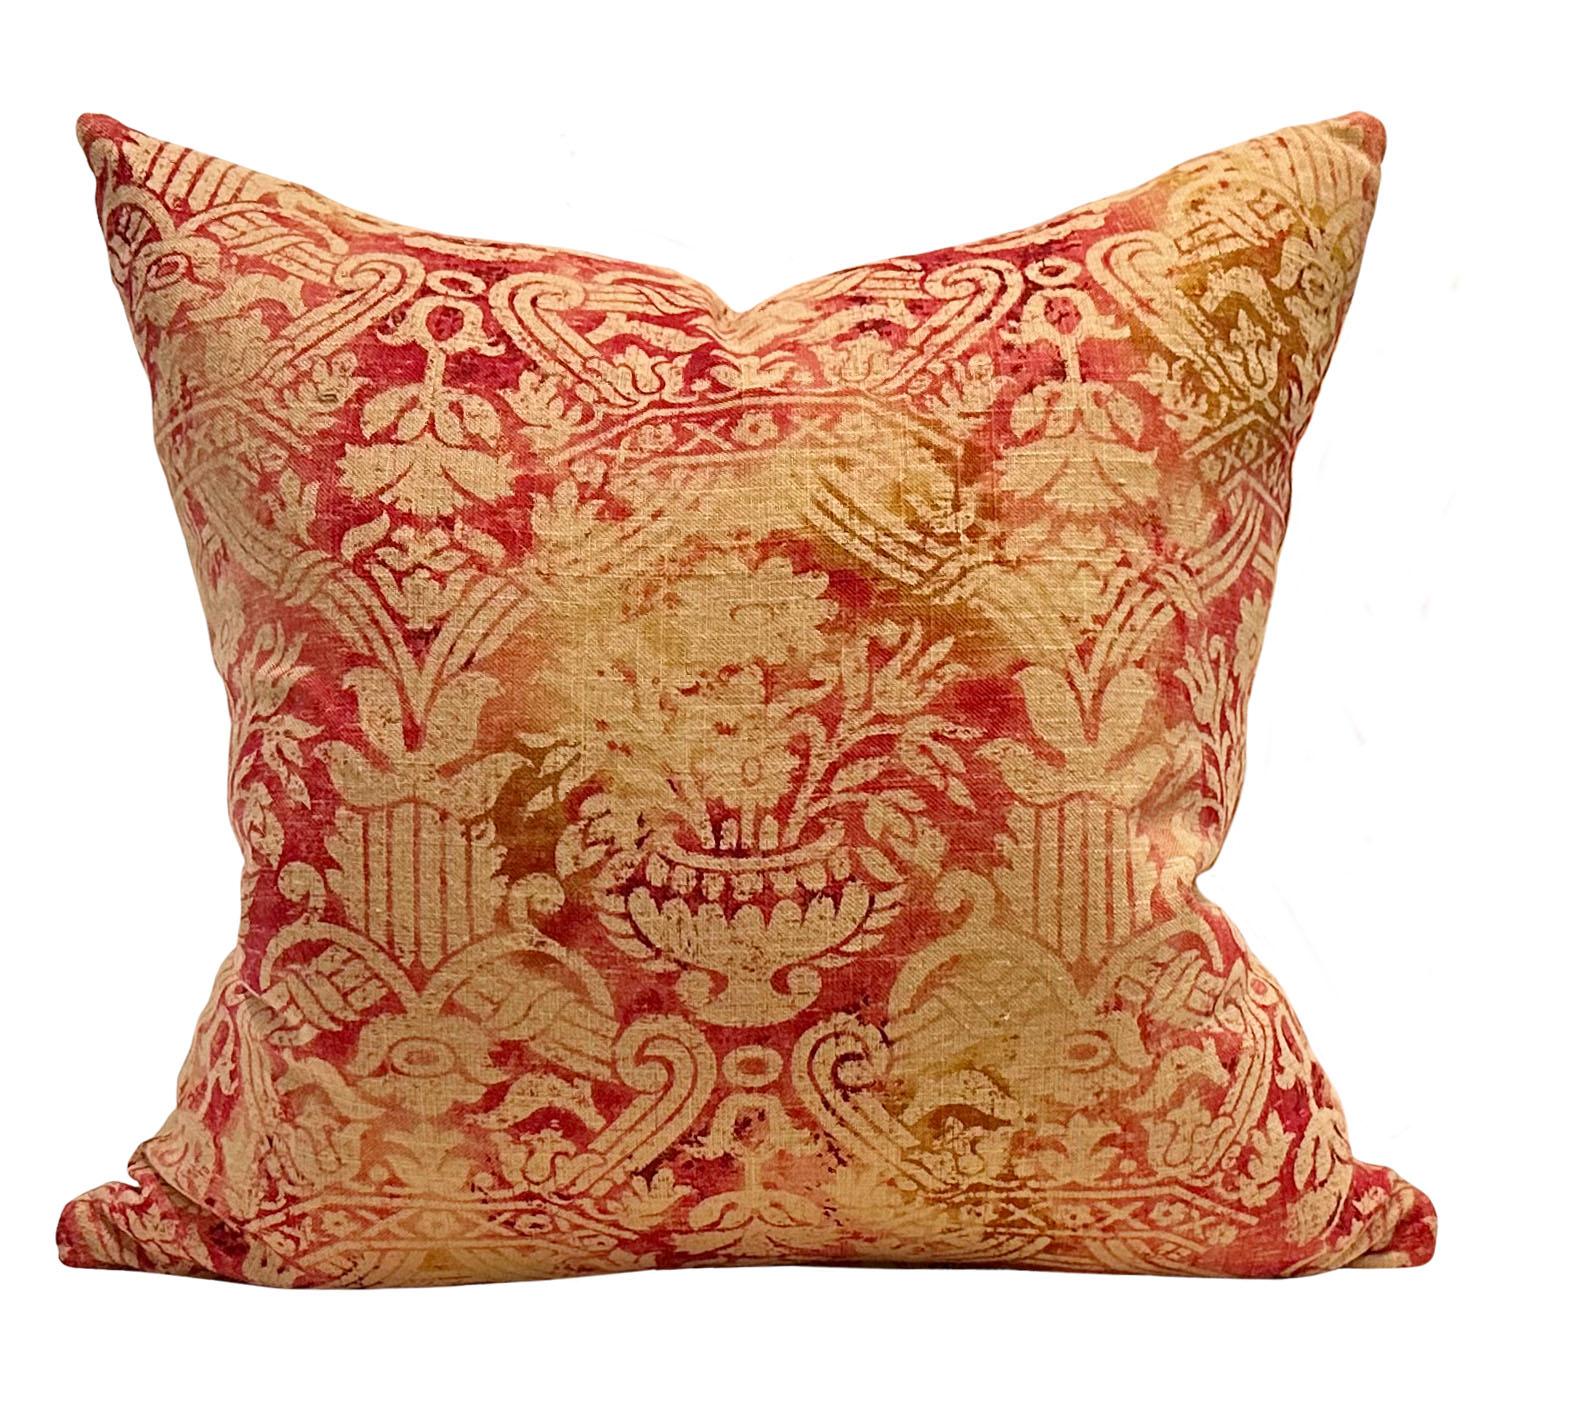 Italian Vintage Fortuny Pillows - A Pair For Sale